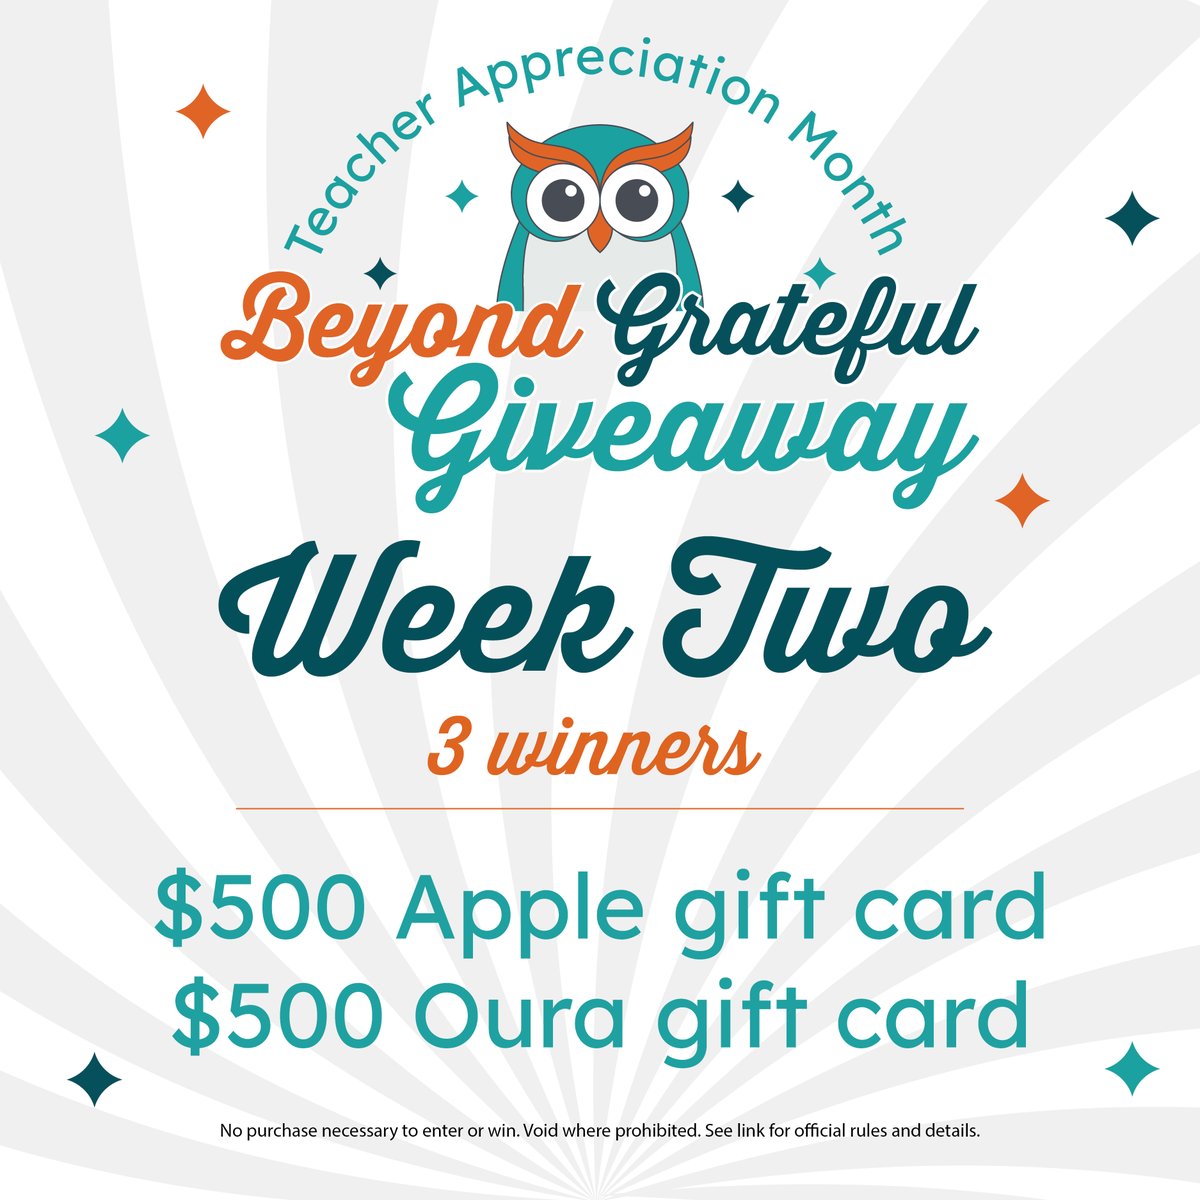 It’s week two of our giveaway! 2 winners will receive a $500 Apple gift card and 1 winner will receive a $500 Oura gift card. We’re announcing winners THIS FRIDAY! Enter here: ow.ly/RZGU50Rmzqz #HMBeyondGrateful